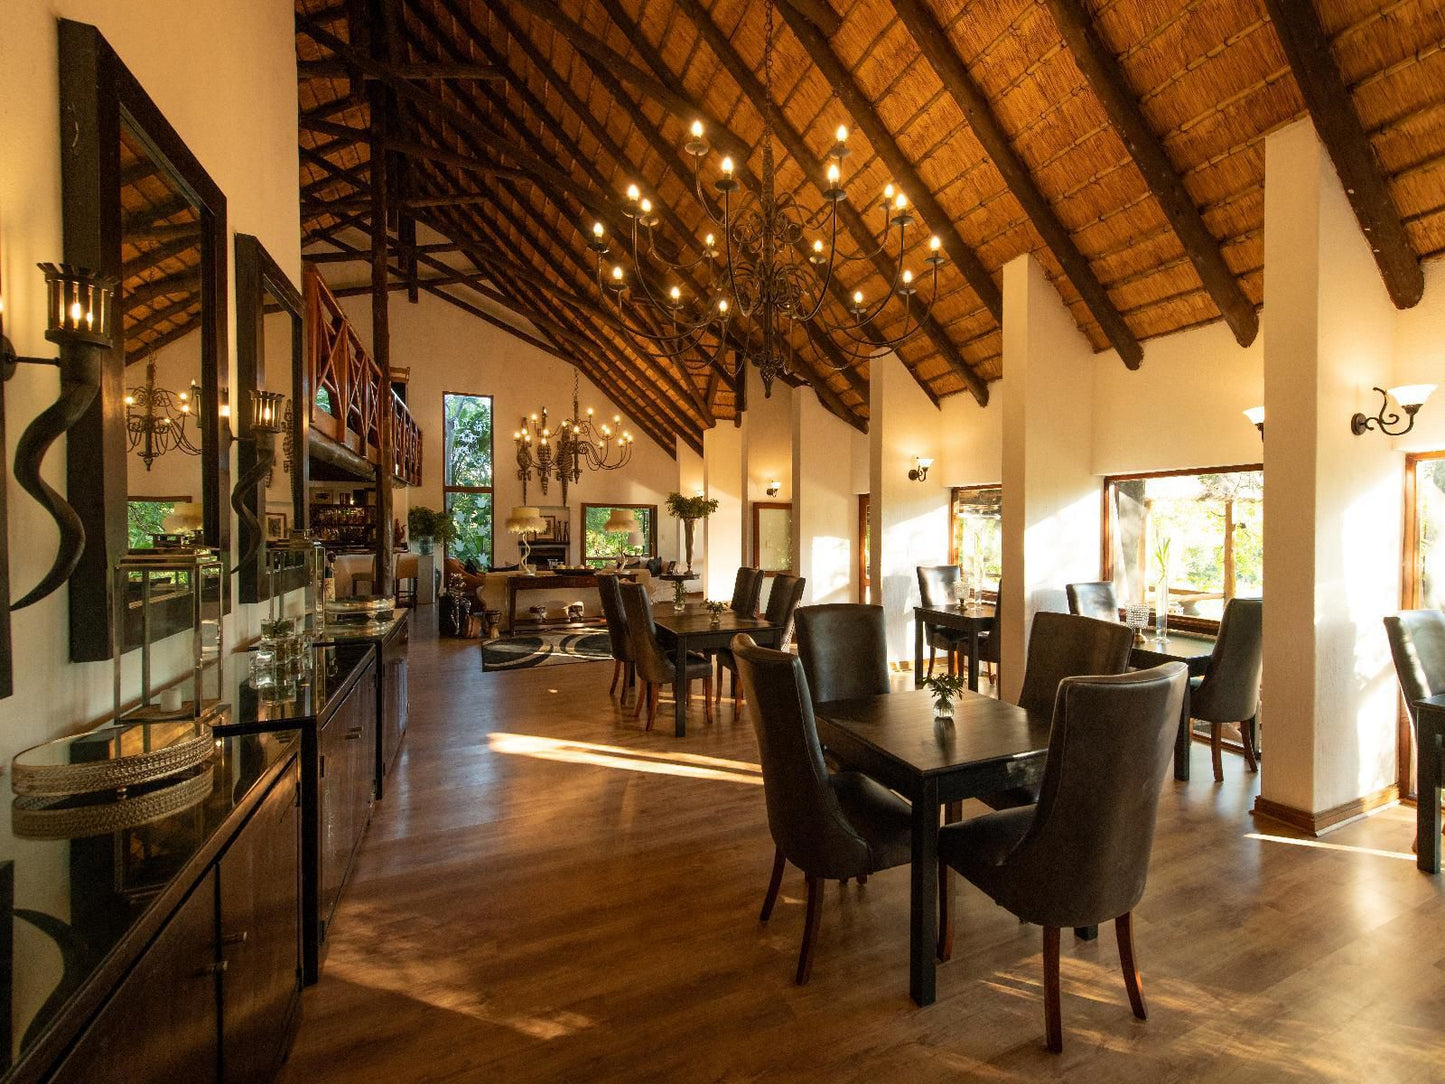 Kuname Lodge Karongwe Private Game Reserve Limpopo Province South Africa Colorful, Restaurant, Bar